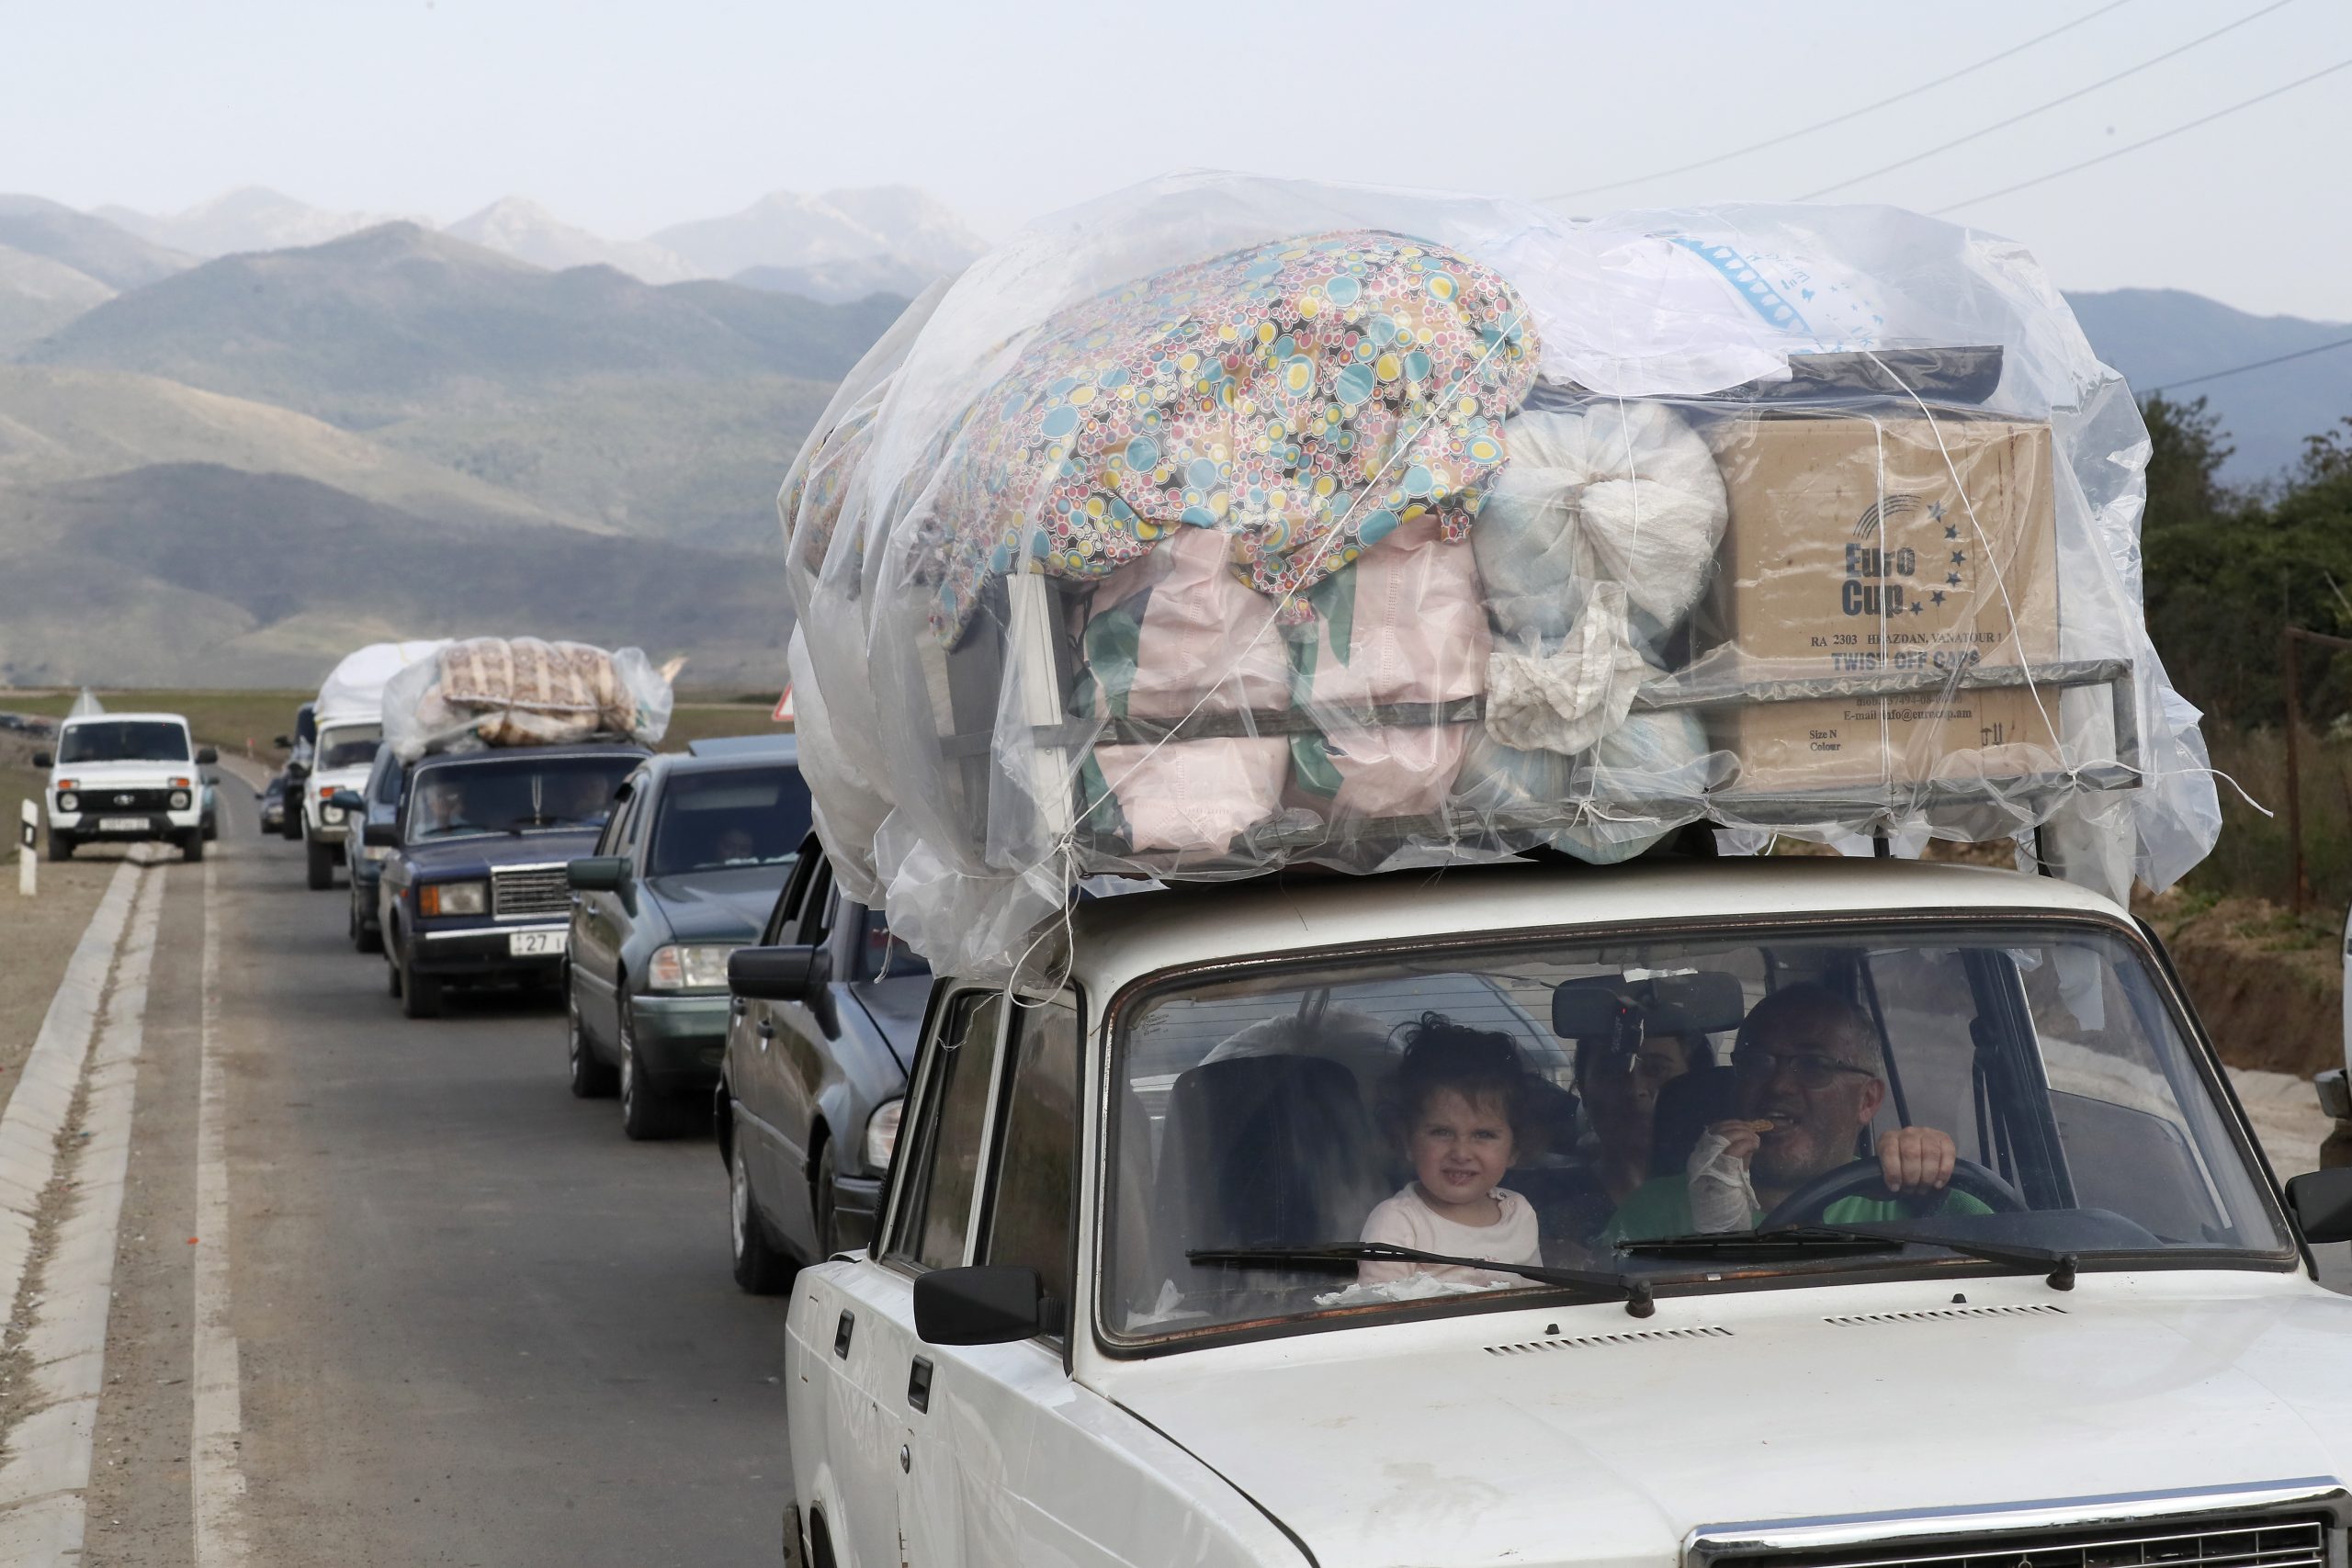 epaselect epa10890113 Ethnic Armenians from Nagorno-Karabakh cross the border with Azerbaijan by car, carrying their belongings with them, near the village of Kornidzor, Armenia, 29 September 2023. Azerbaijan on 19 September 2023 launched a brief military offensive on the contested region of Nagorno-Karabakh, a breakaway enclave that is home to some 120,000 ethnic Armenians. Following a ceasefire agreed on 20 September 2023, Azerbaijan opened all checkpoints with Armenia for the unimpeded exit of civilians from the disputed territory. The Armenian government announced the evacuation of more than 85,000 local residents from Nagorno-Karabakh, and a humanitarian center has been set up in the village of Kornidzor near the so-called Lachin corridor, the main route between Armenia and the breakaway region. Nagorno-Karabakh will 'cease to exist' as a self-proclaimed state from 01 January 2024, the region's separatist leader, Samvel Shakhramanyan, announced on 28 September, after signing a decree to dissolve all its institutions.  EPA/ANATOLY MALTSEV